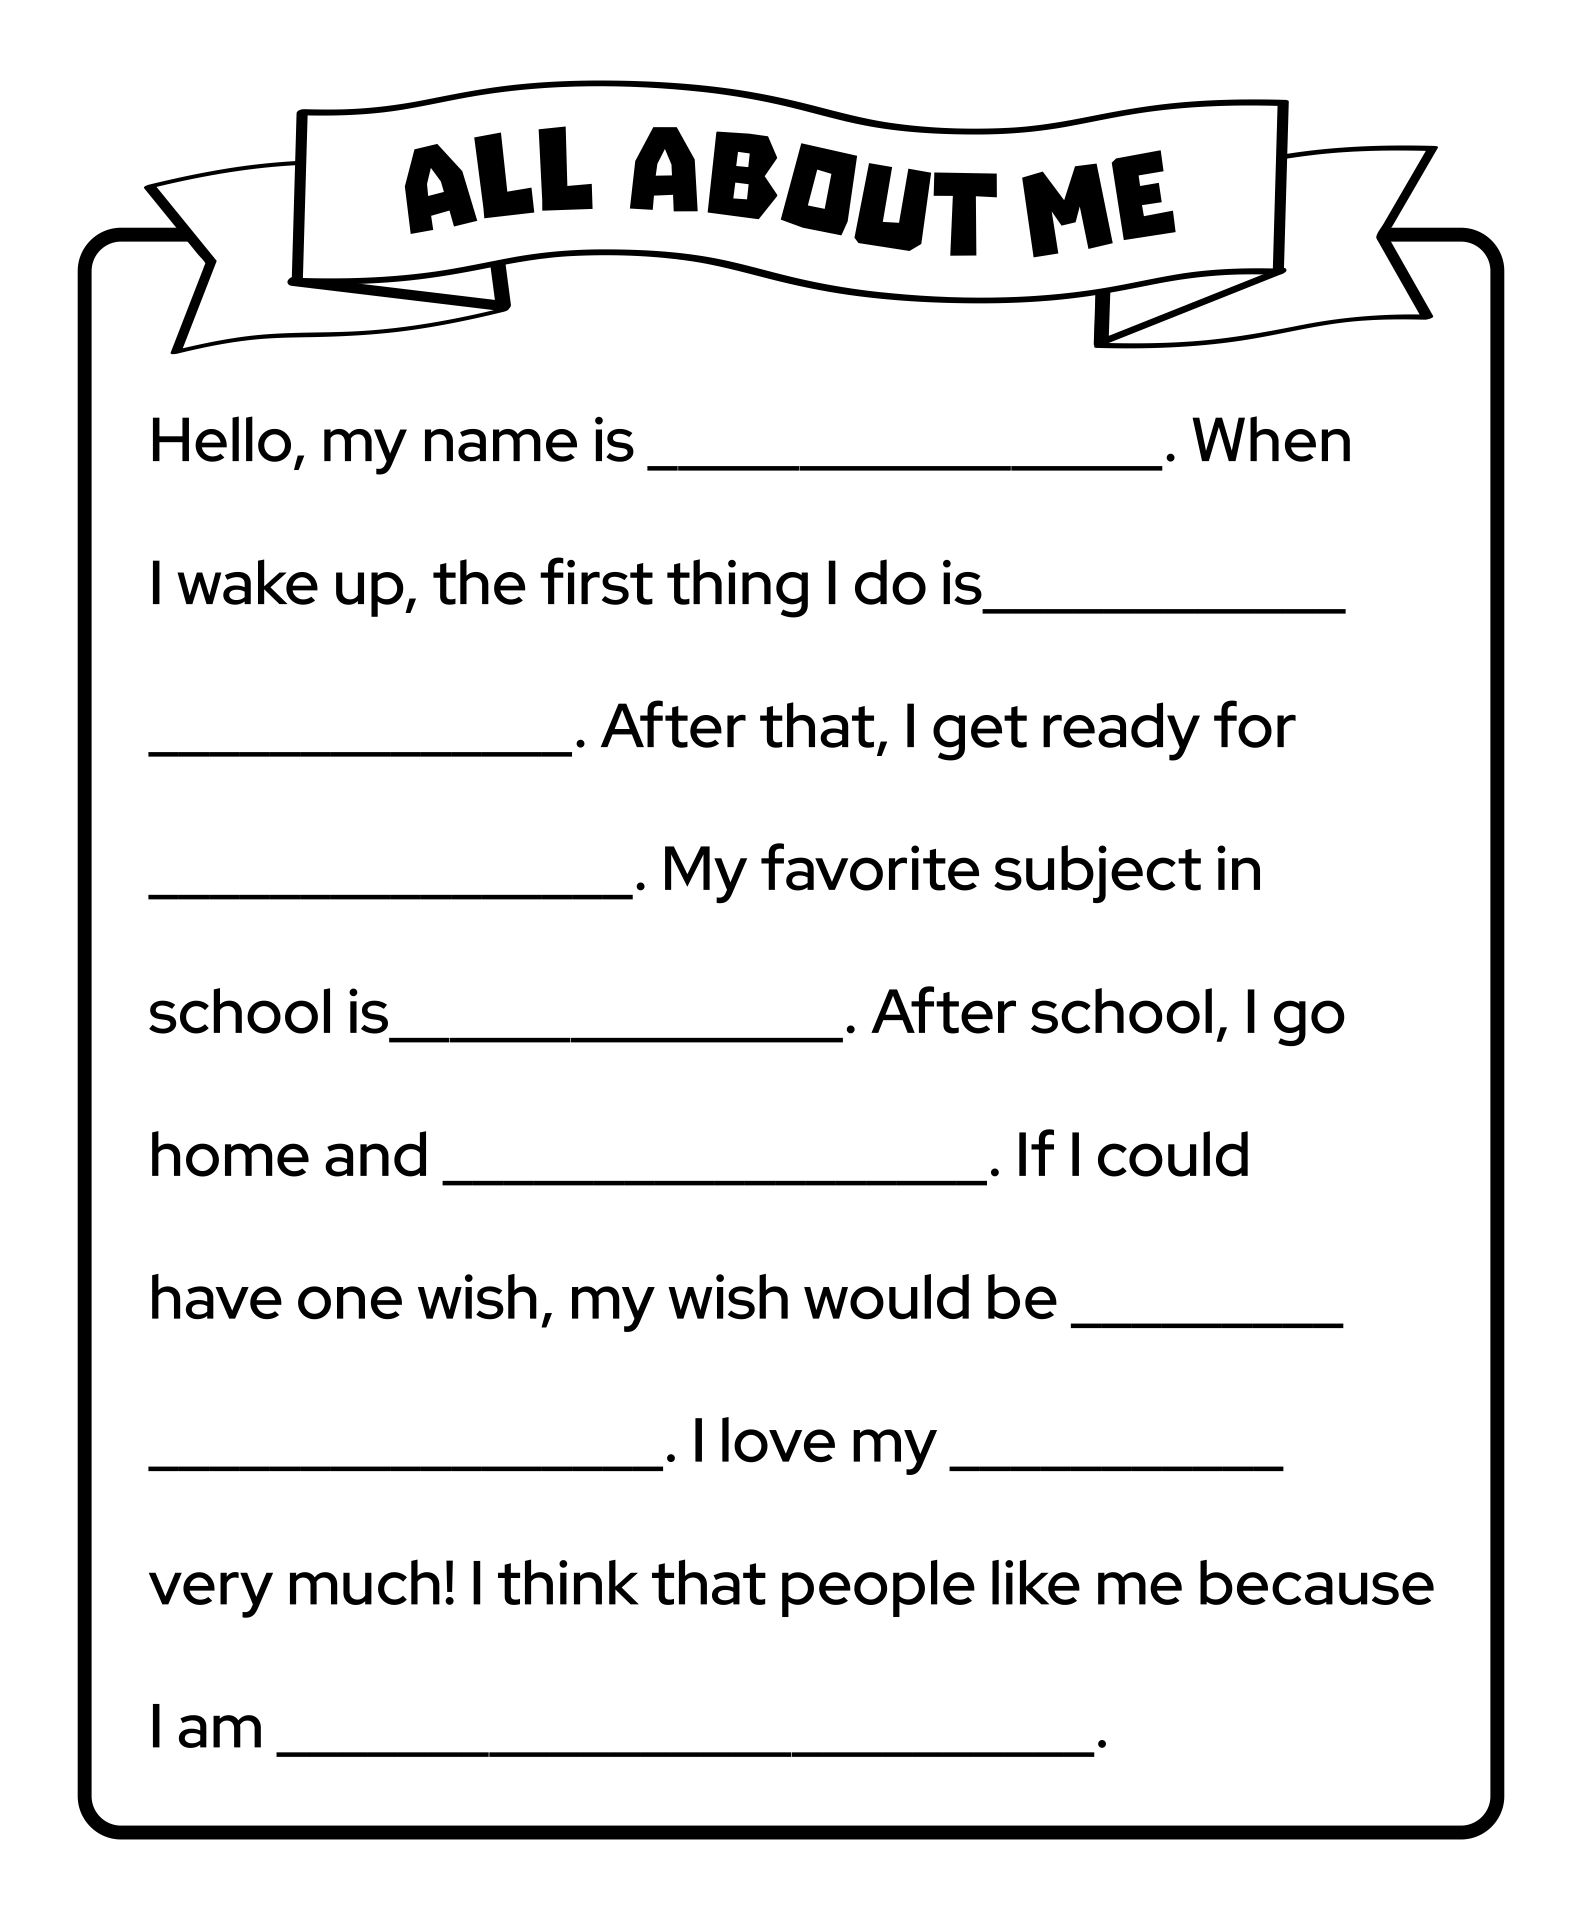 all-about-me-school-worksheet-images-and-photos-finder